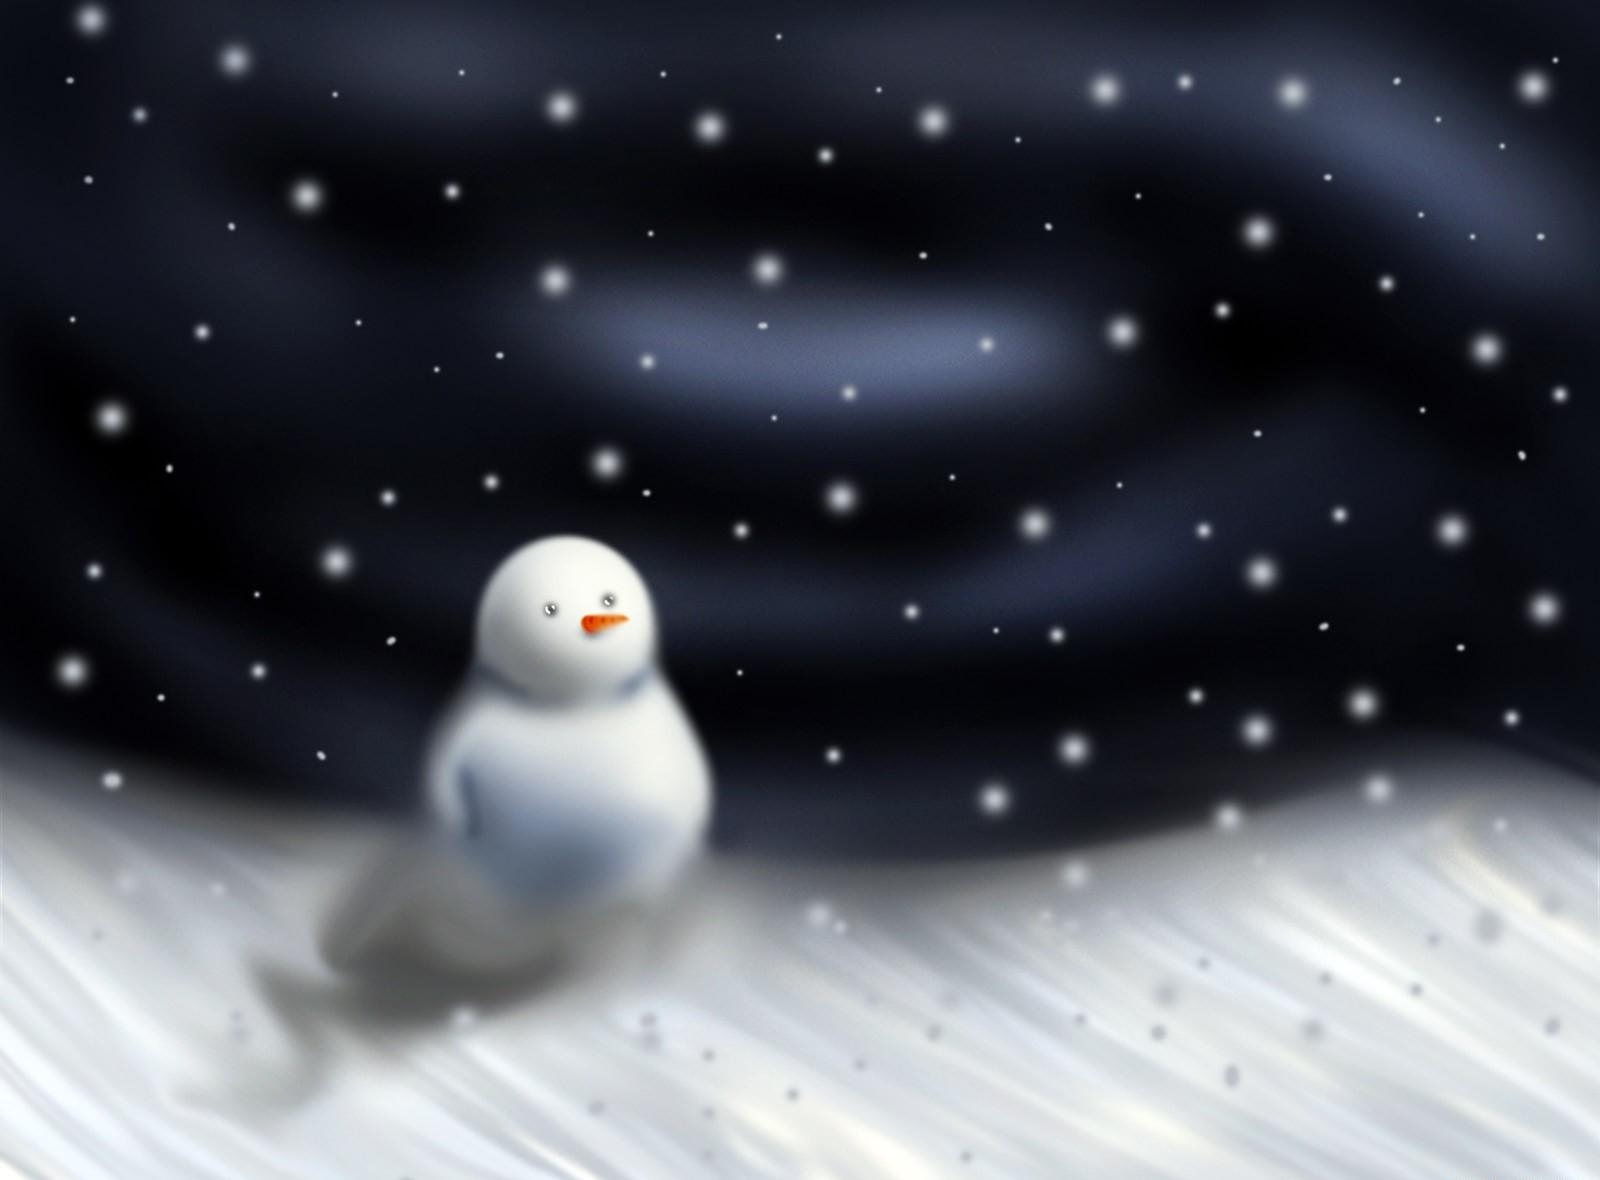 137566 download wallpaper holidays, night, snow, snowman, snowstorm screensavers and pictures for free